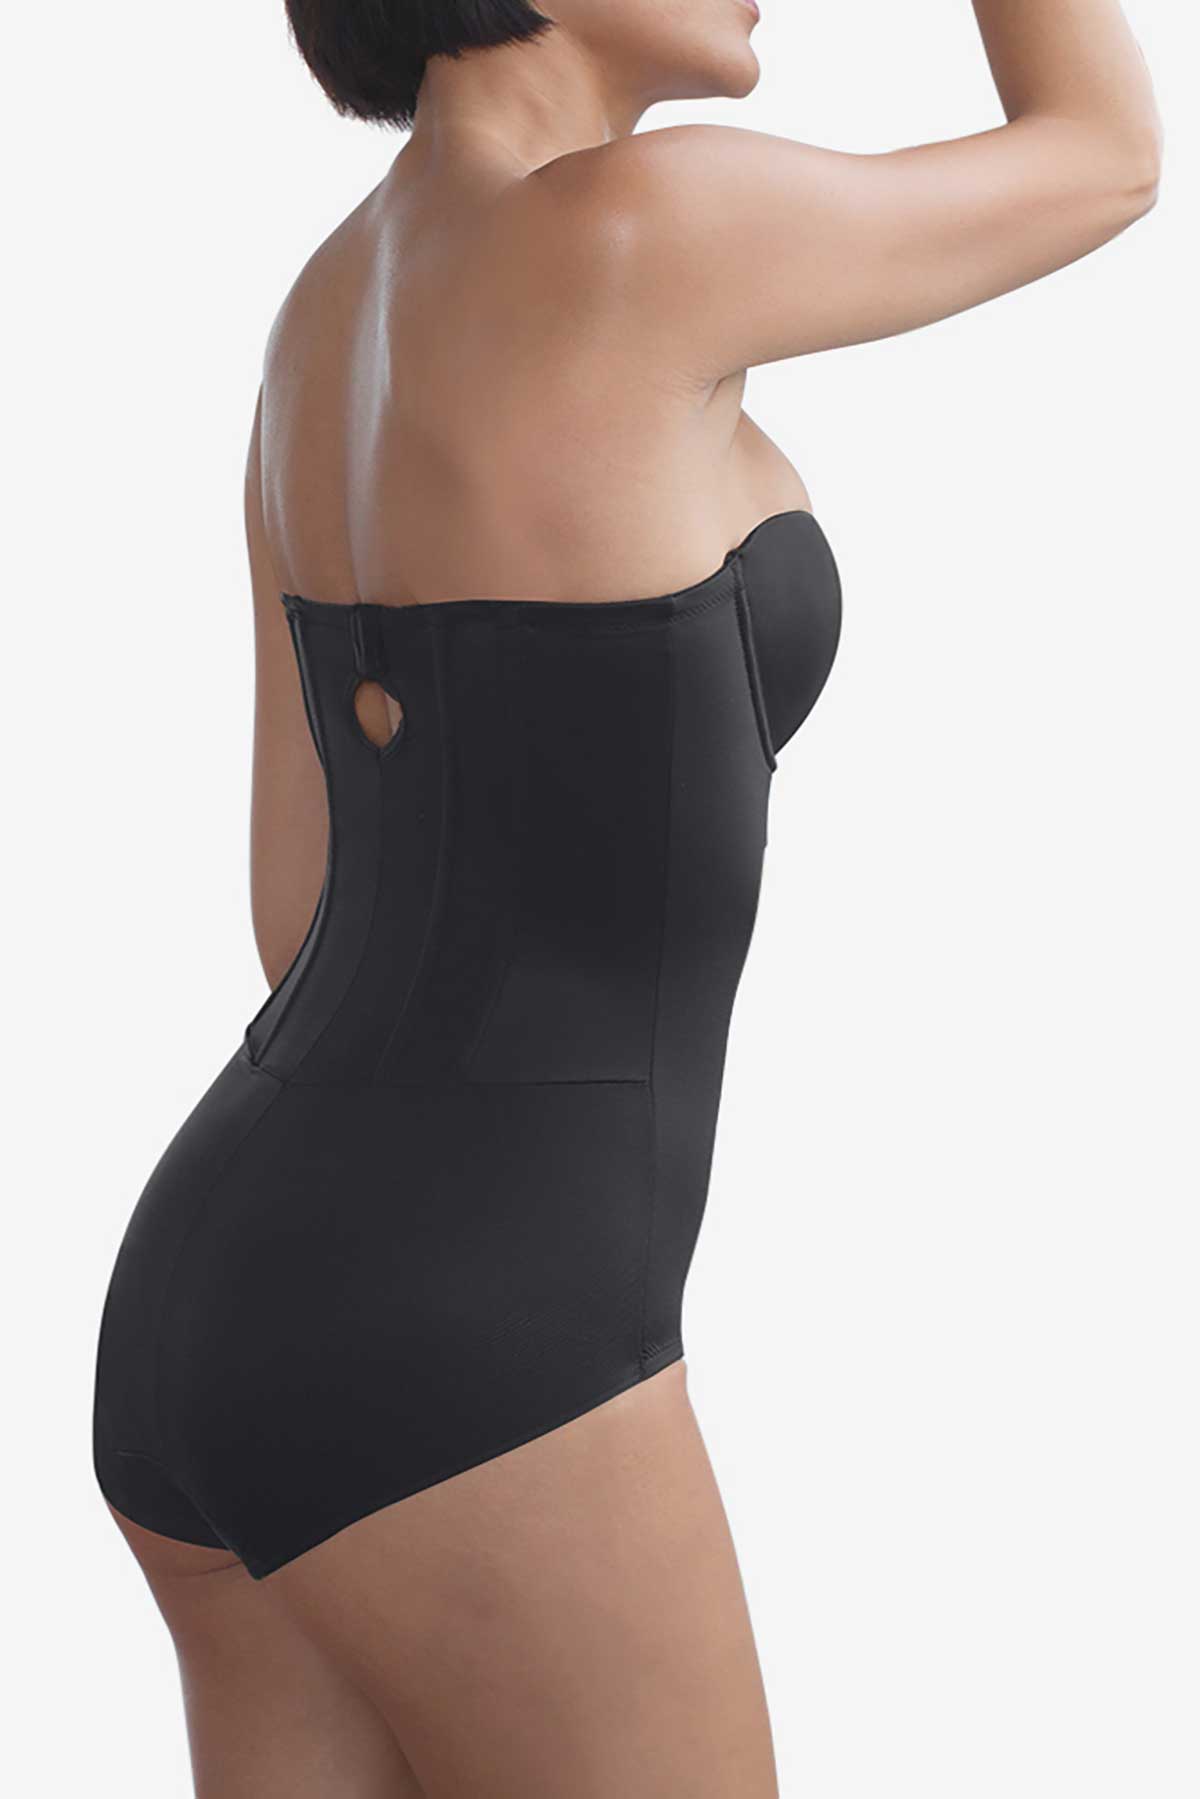 Miraclesuit Shape Away With Back Magic - No Muffin Top! – The Magic Knicker  Shop